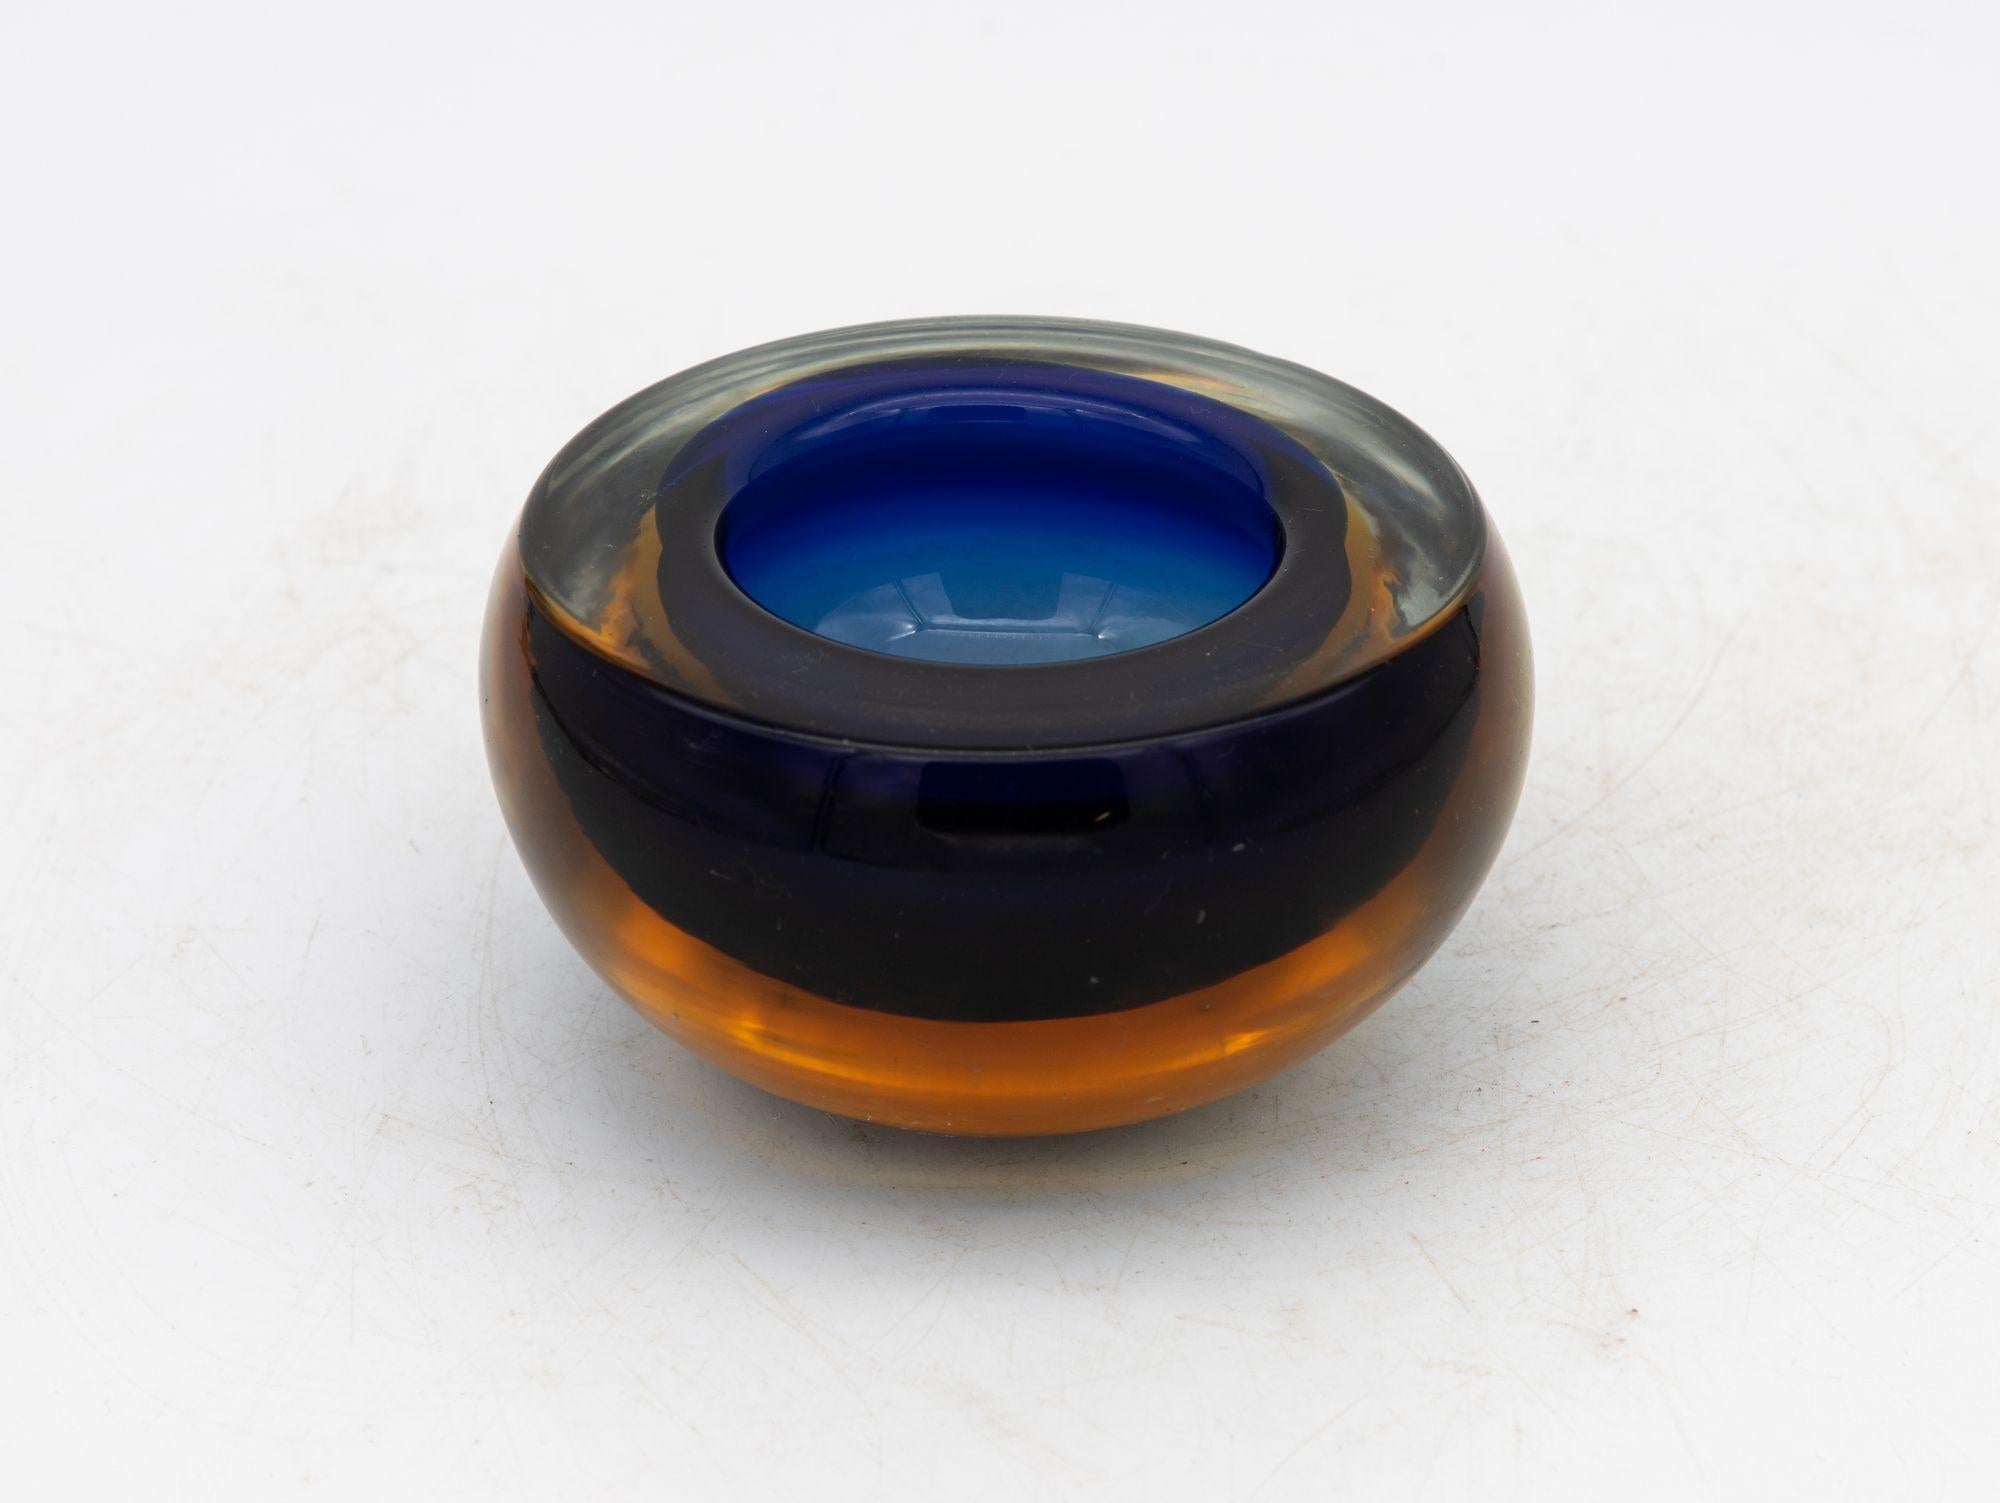 Crafted in the vibrant spirit of the 1960s, this Murano glass ashtray exudes timeless charm. With its square shape and gently rounded corners, the thick glass construction boasts both sturdiness and elegance. The color palette, a gradient of deep